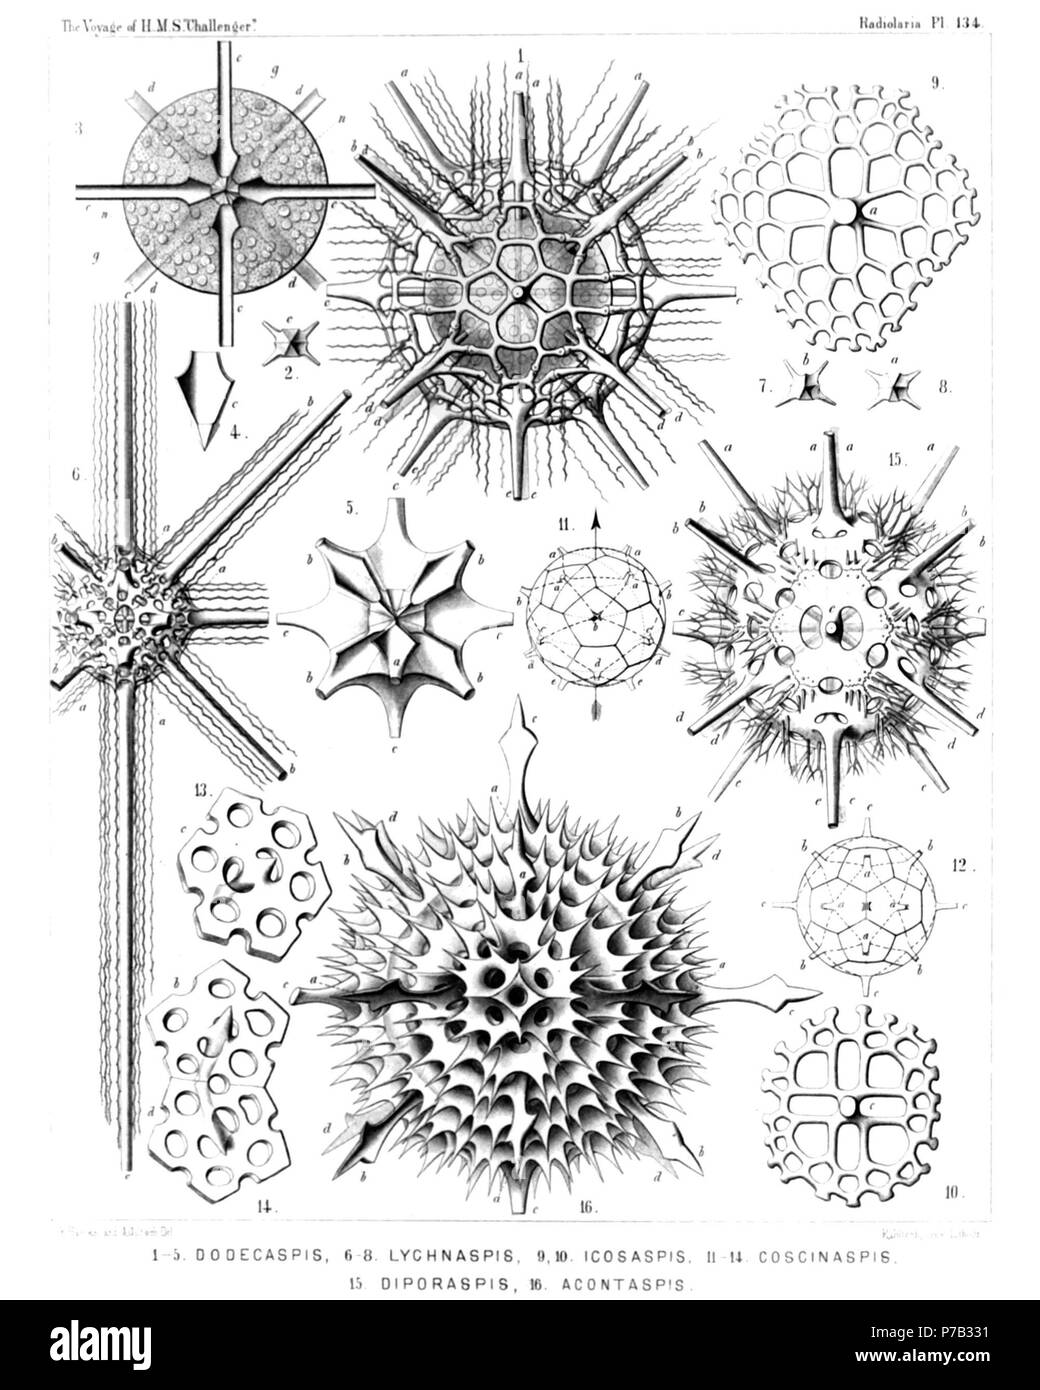 English: Illustration from Report on the Radiolaria collected by H.M.S. Challenger during the years 1873-1876. Part III. Original description follows:  Plate 134. Dorataspida.  Diam.  Fig. 1. Dodecaspis tricincta, n. sp., × 400  The enclosed central capsule contains numerous spherical nuclei.  Fig. 2. Lychnaspis minima, n. sp., × 400  Six-sided basal pyramid of an equatorial spine, with the leaf-cross, seen from the centre.  Fig. 3. Zonaspis cingulata, n. sp., × 400  Equatorial section through the central capsule. n, nuclei; g, yellow bodies (intracapsular xanthellæ).  Fig. 4. Zonaspis cingula Stock Photo